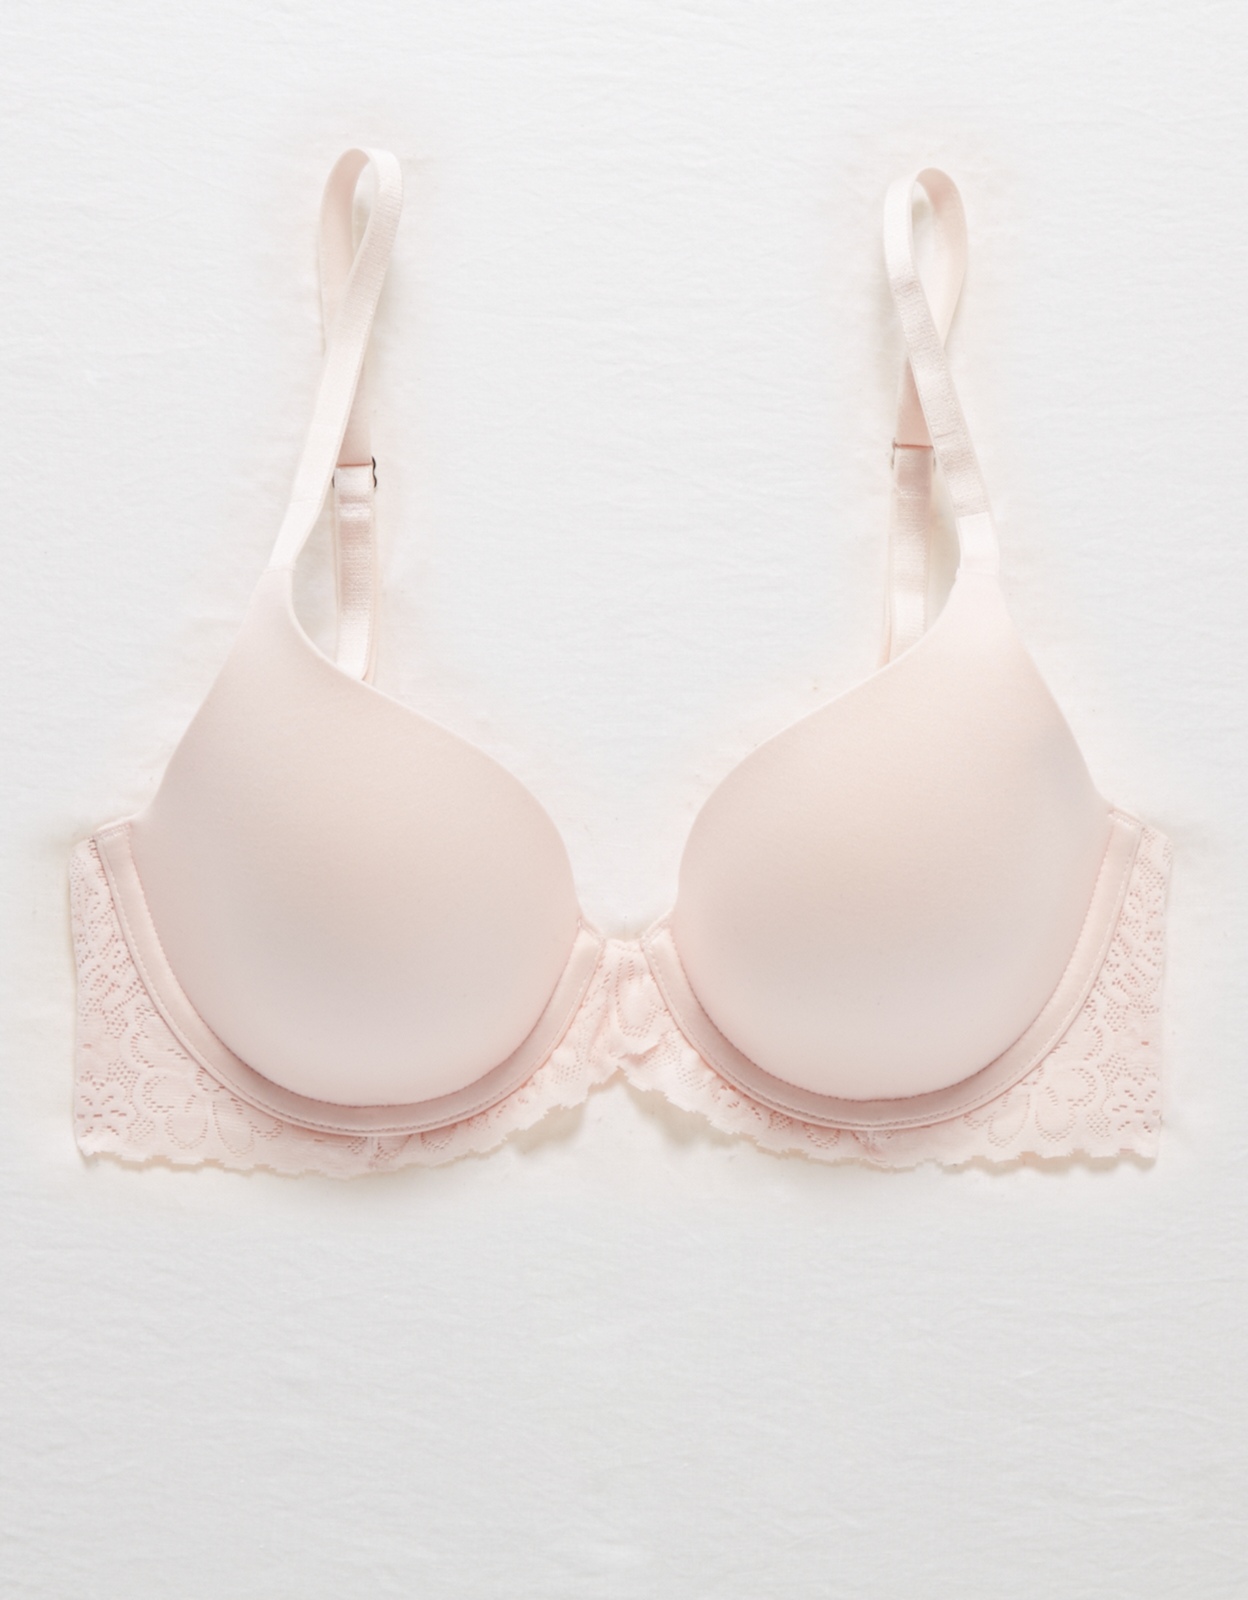 Buy Aerie Real Sunnie Full Coverage Lightly Lined Bra online